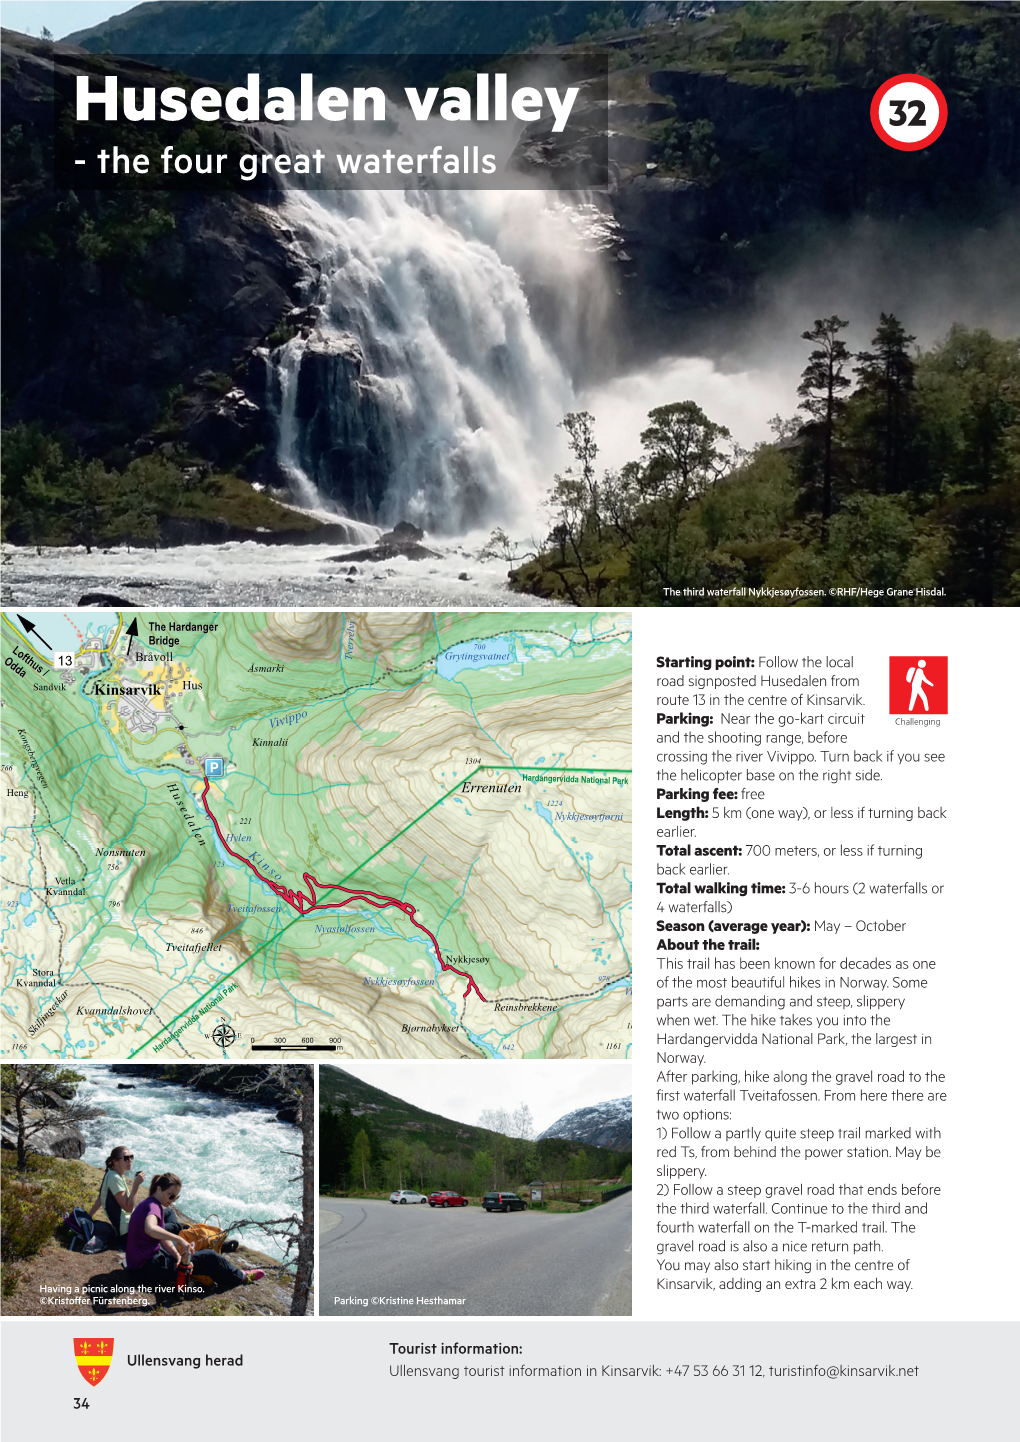 Husedalen Valley 32 - the Four Great Waterfalls